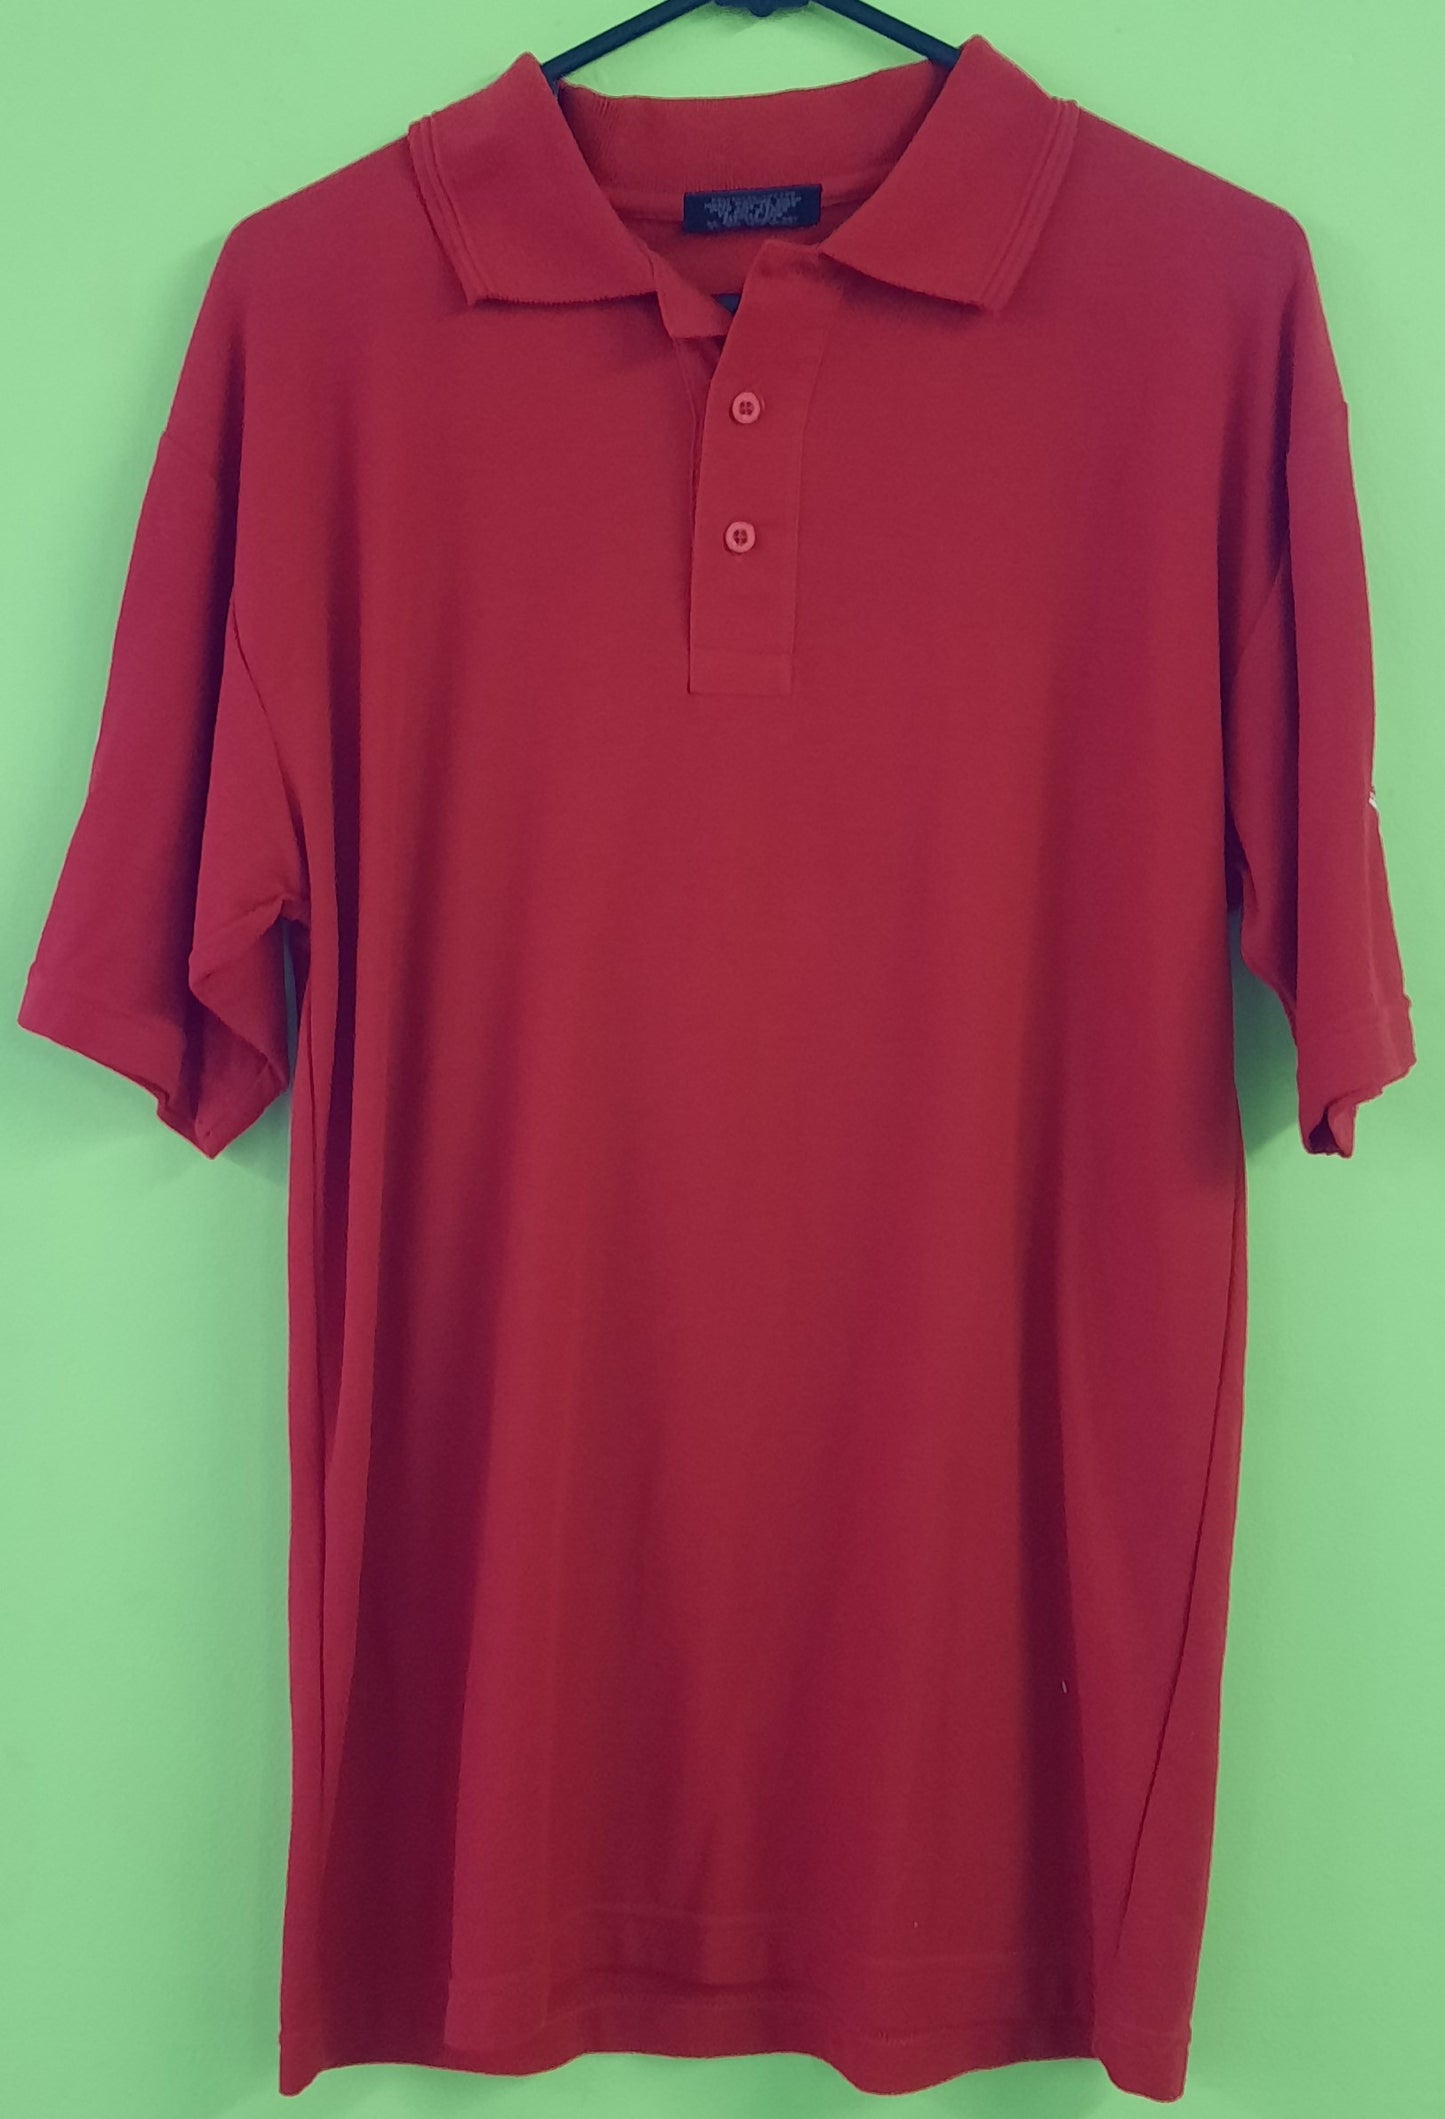 Ford Crest Polo Shirt - Red (Men's)